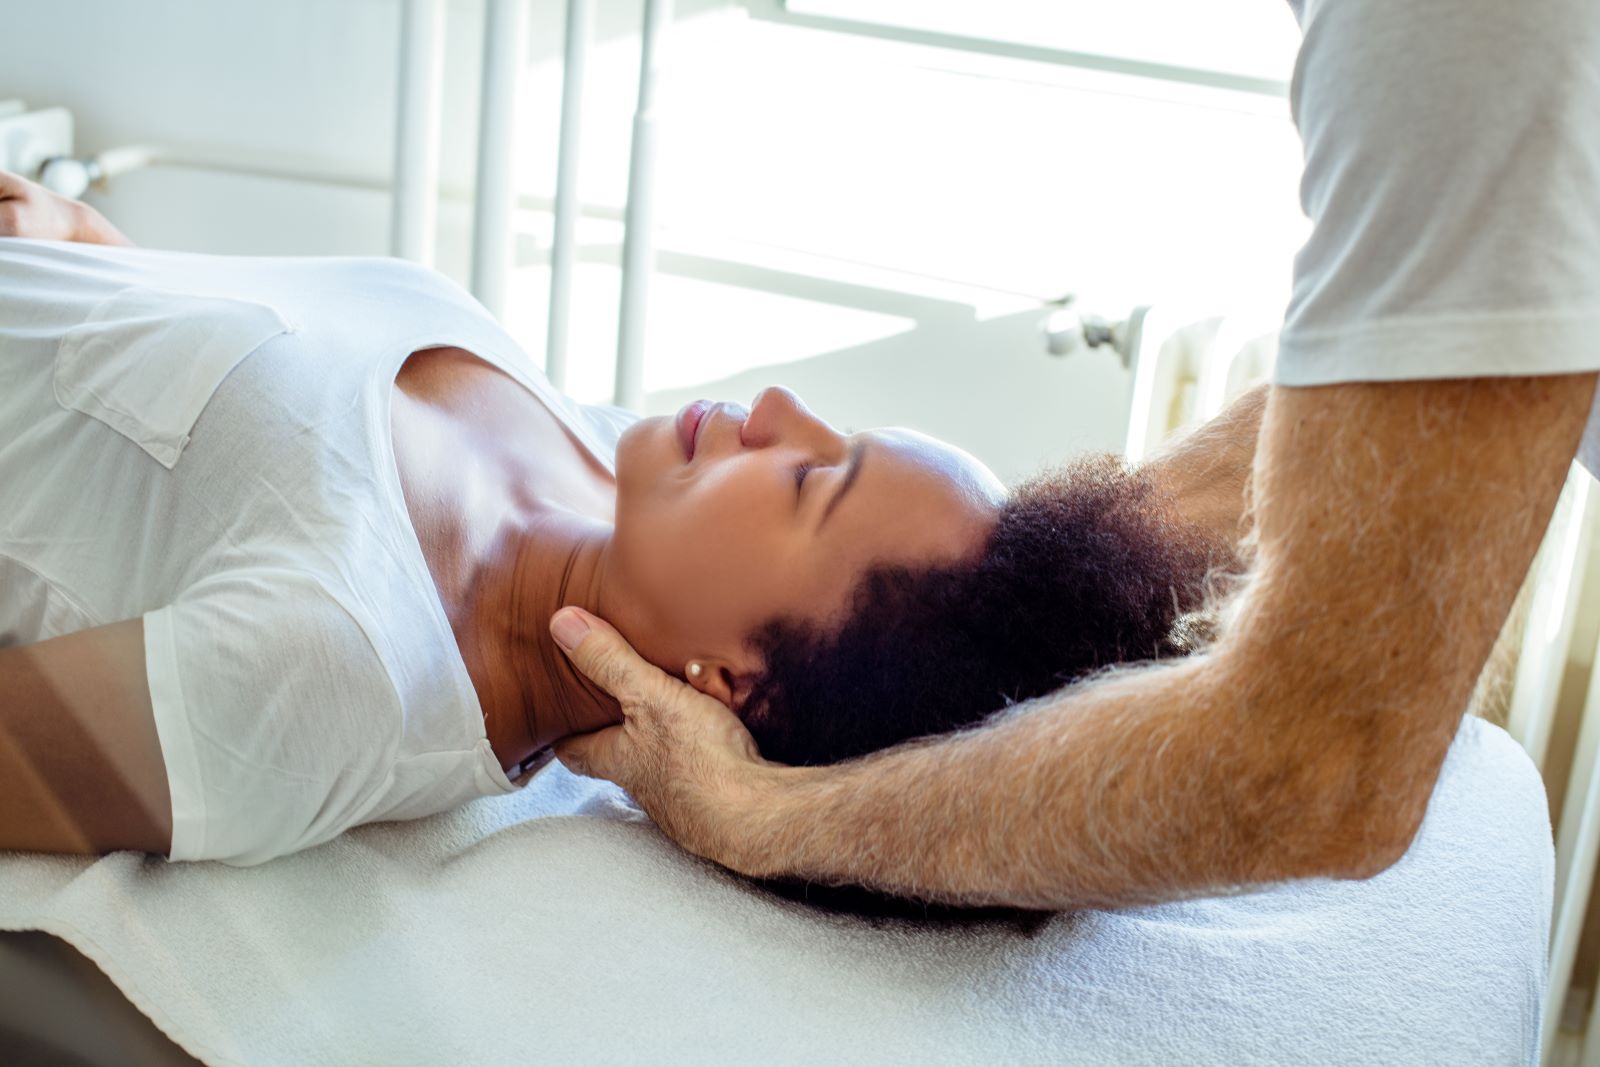 Can Physical Therapy Help With Headaches?